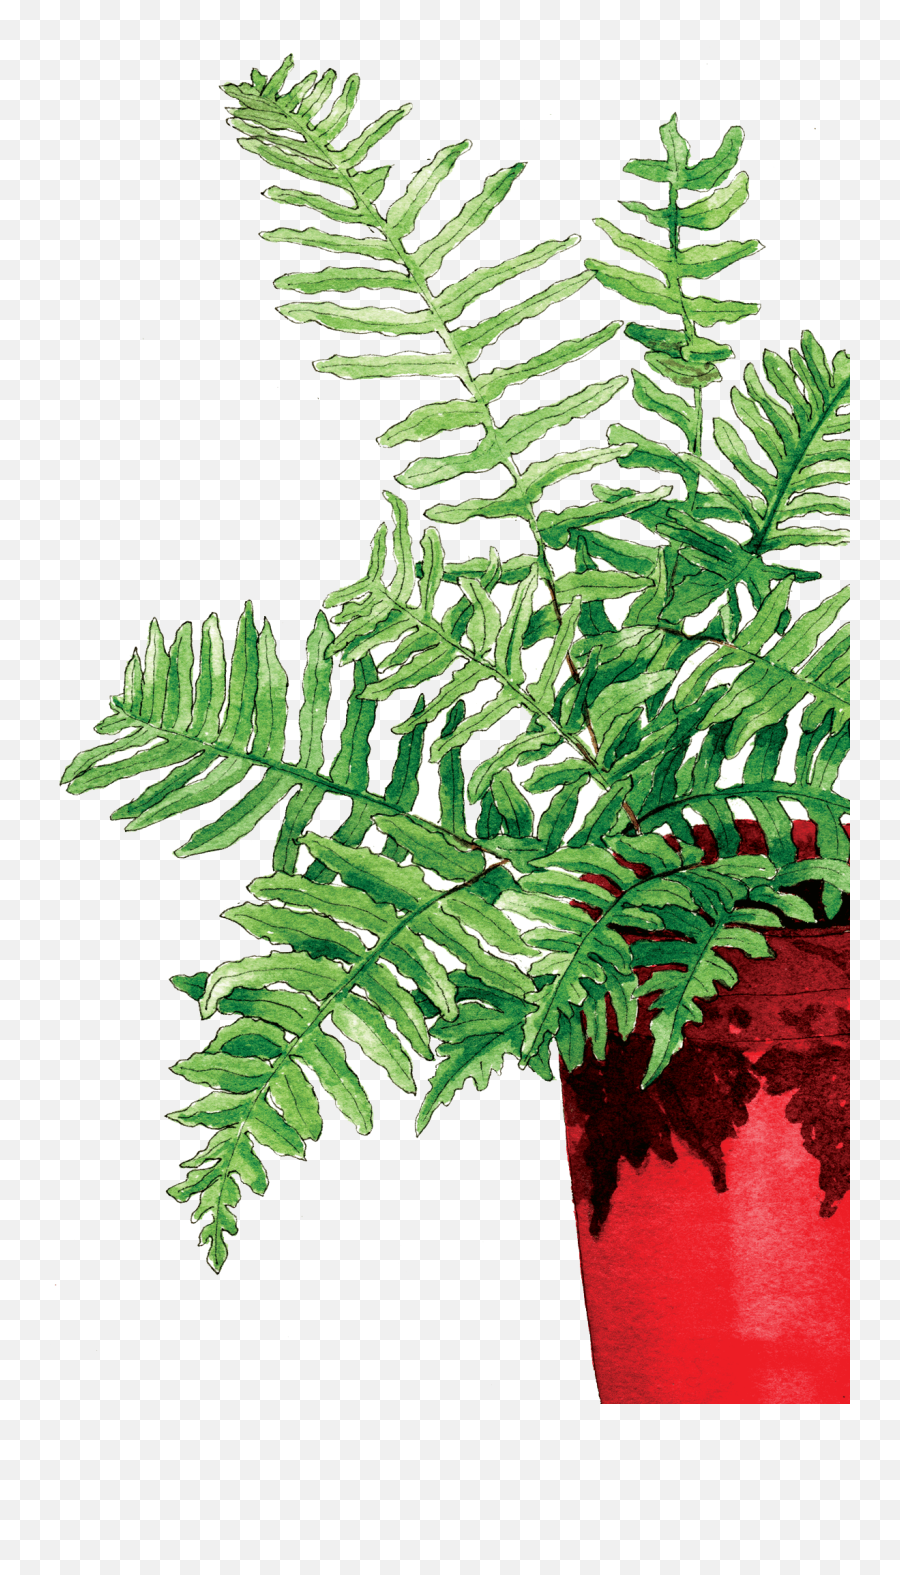 Download Fern In The Red Pot - Fern Full Size Png Image Fern,Fern Png